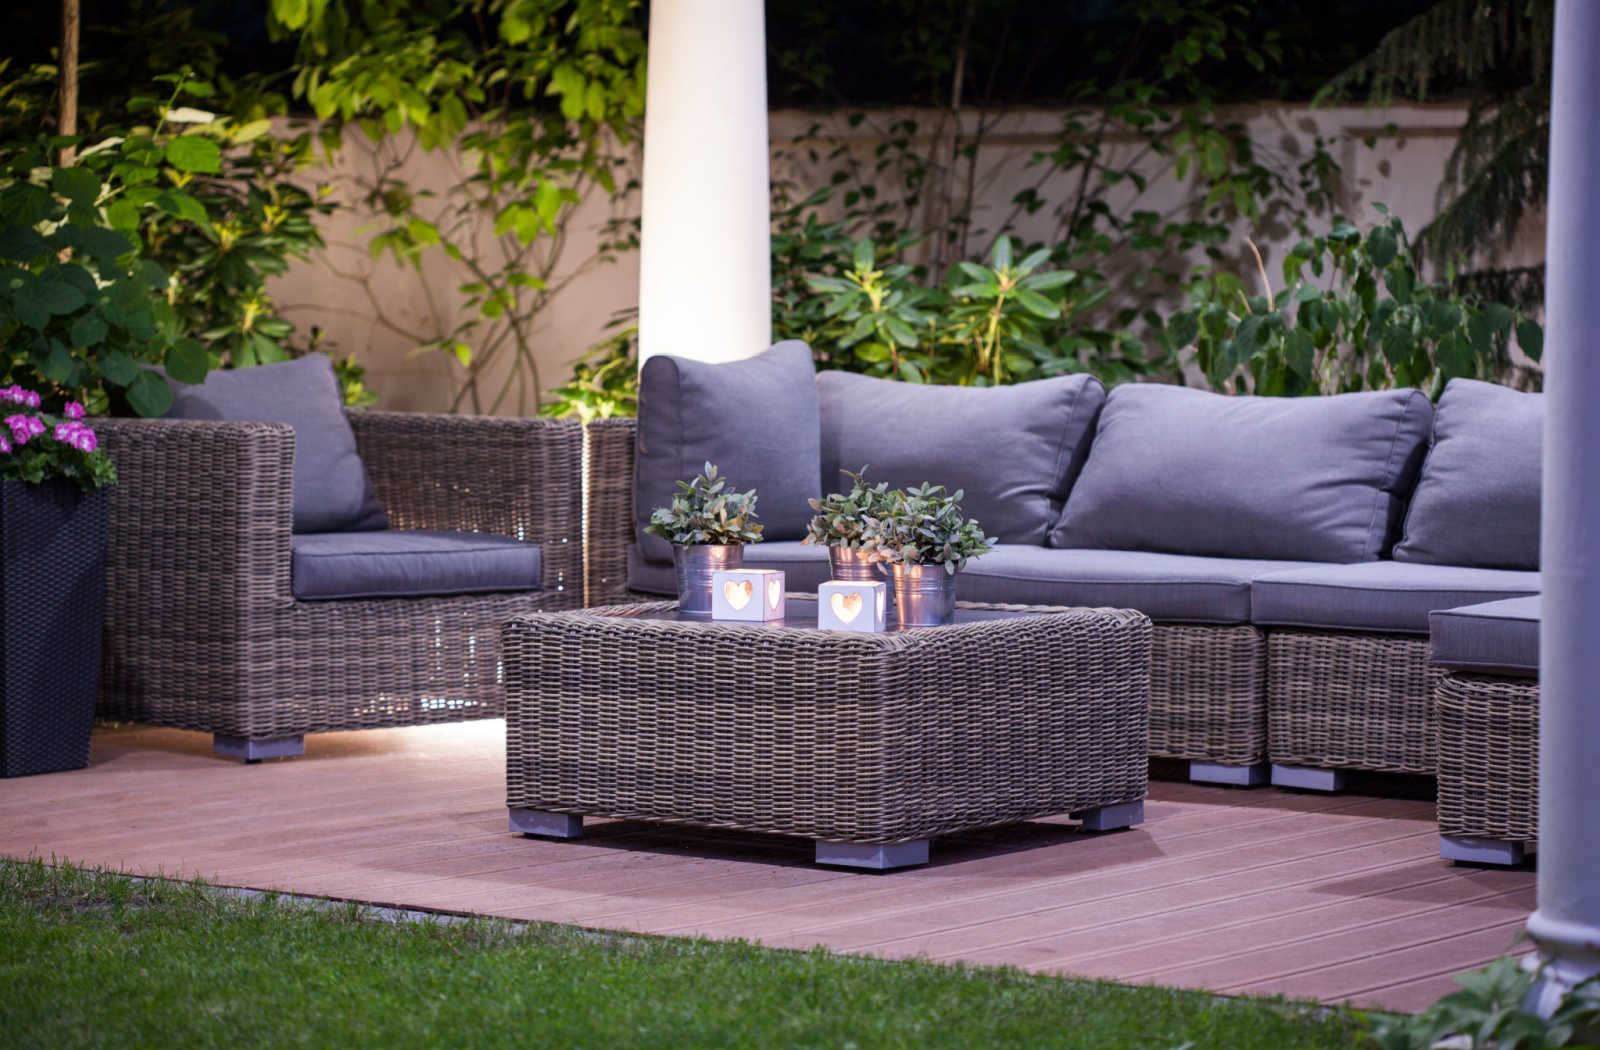 Resin wicker outdoor furniture, including a couch, chair, and coffee table